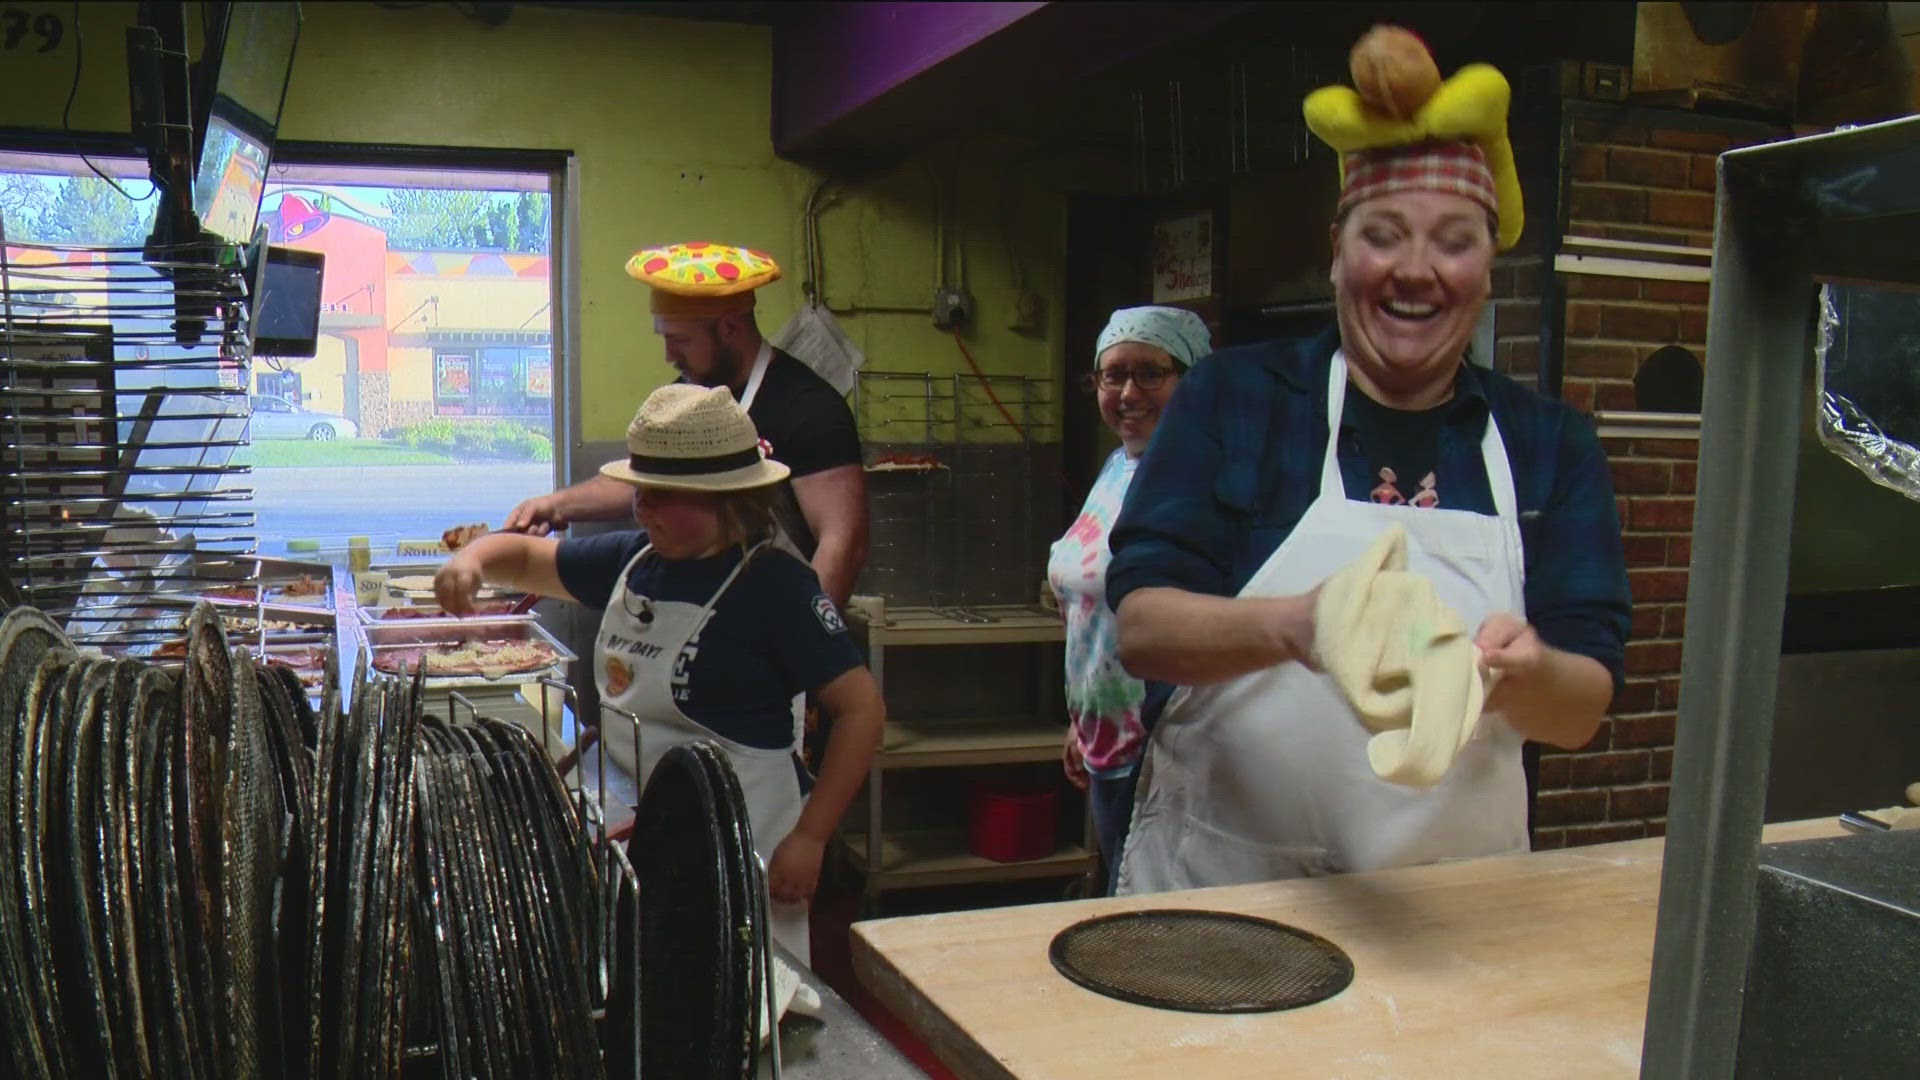 The Flying Pie Pizza in Boise gave pizza to those who had been on TV. So KTVB put them on TV.